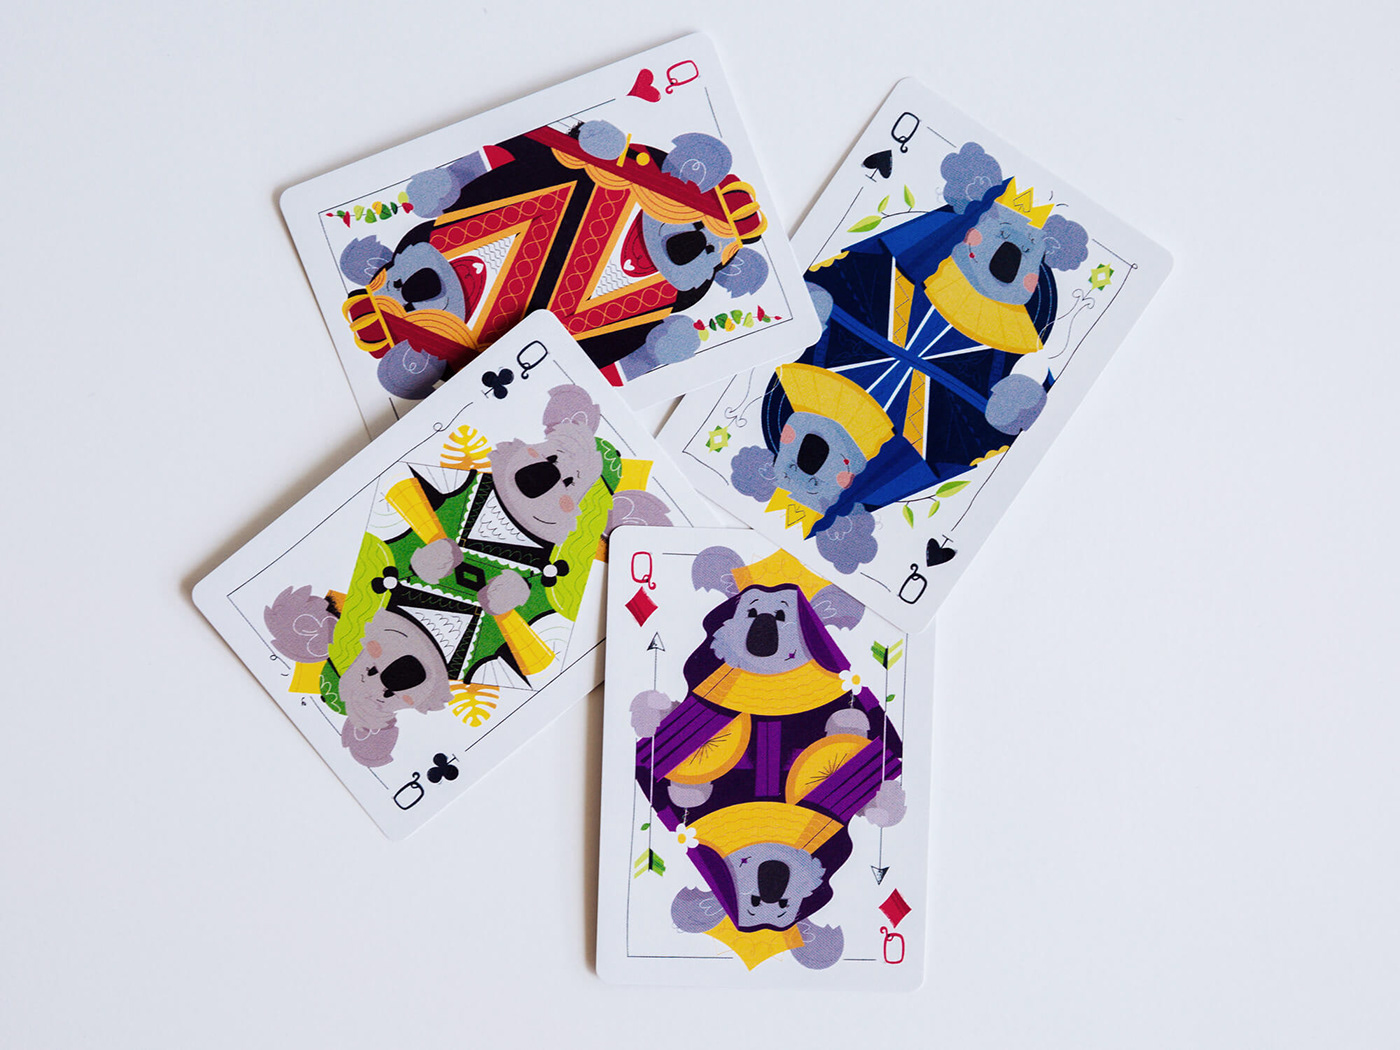 Deck of cards with illustrated koala characters